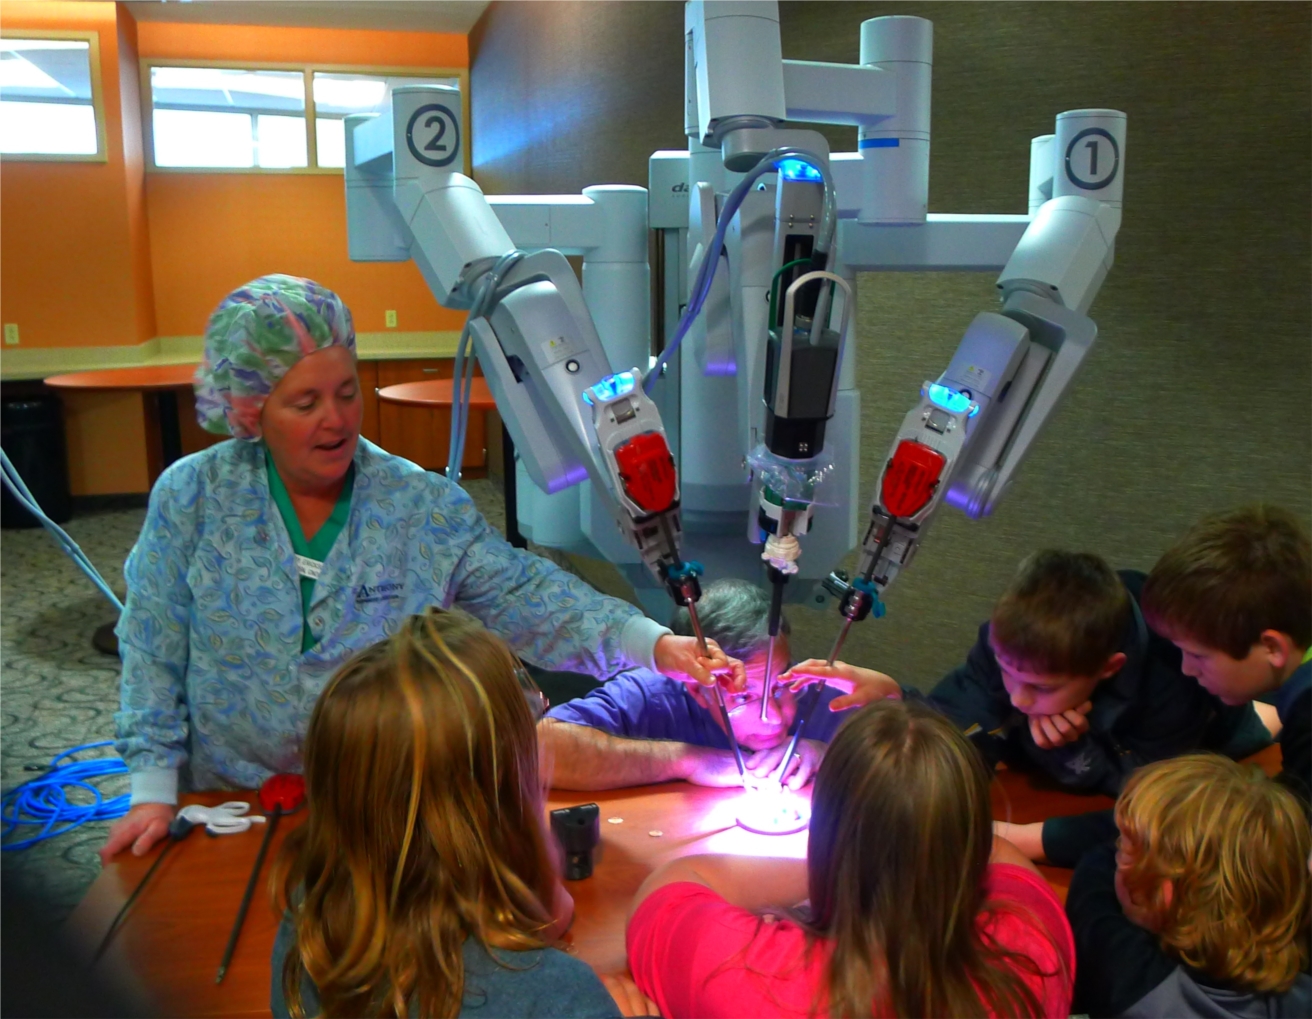 Sharing with grade school children how the DaVinci Surgical Robot operates